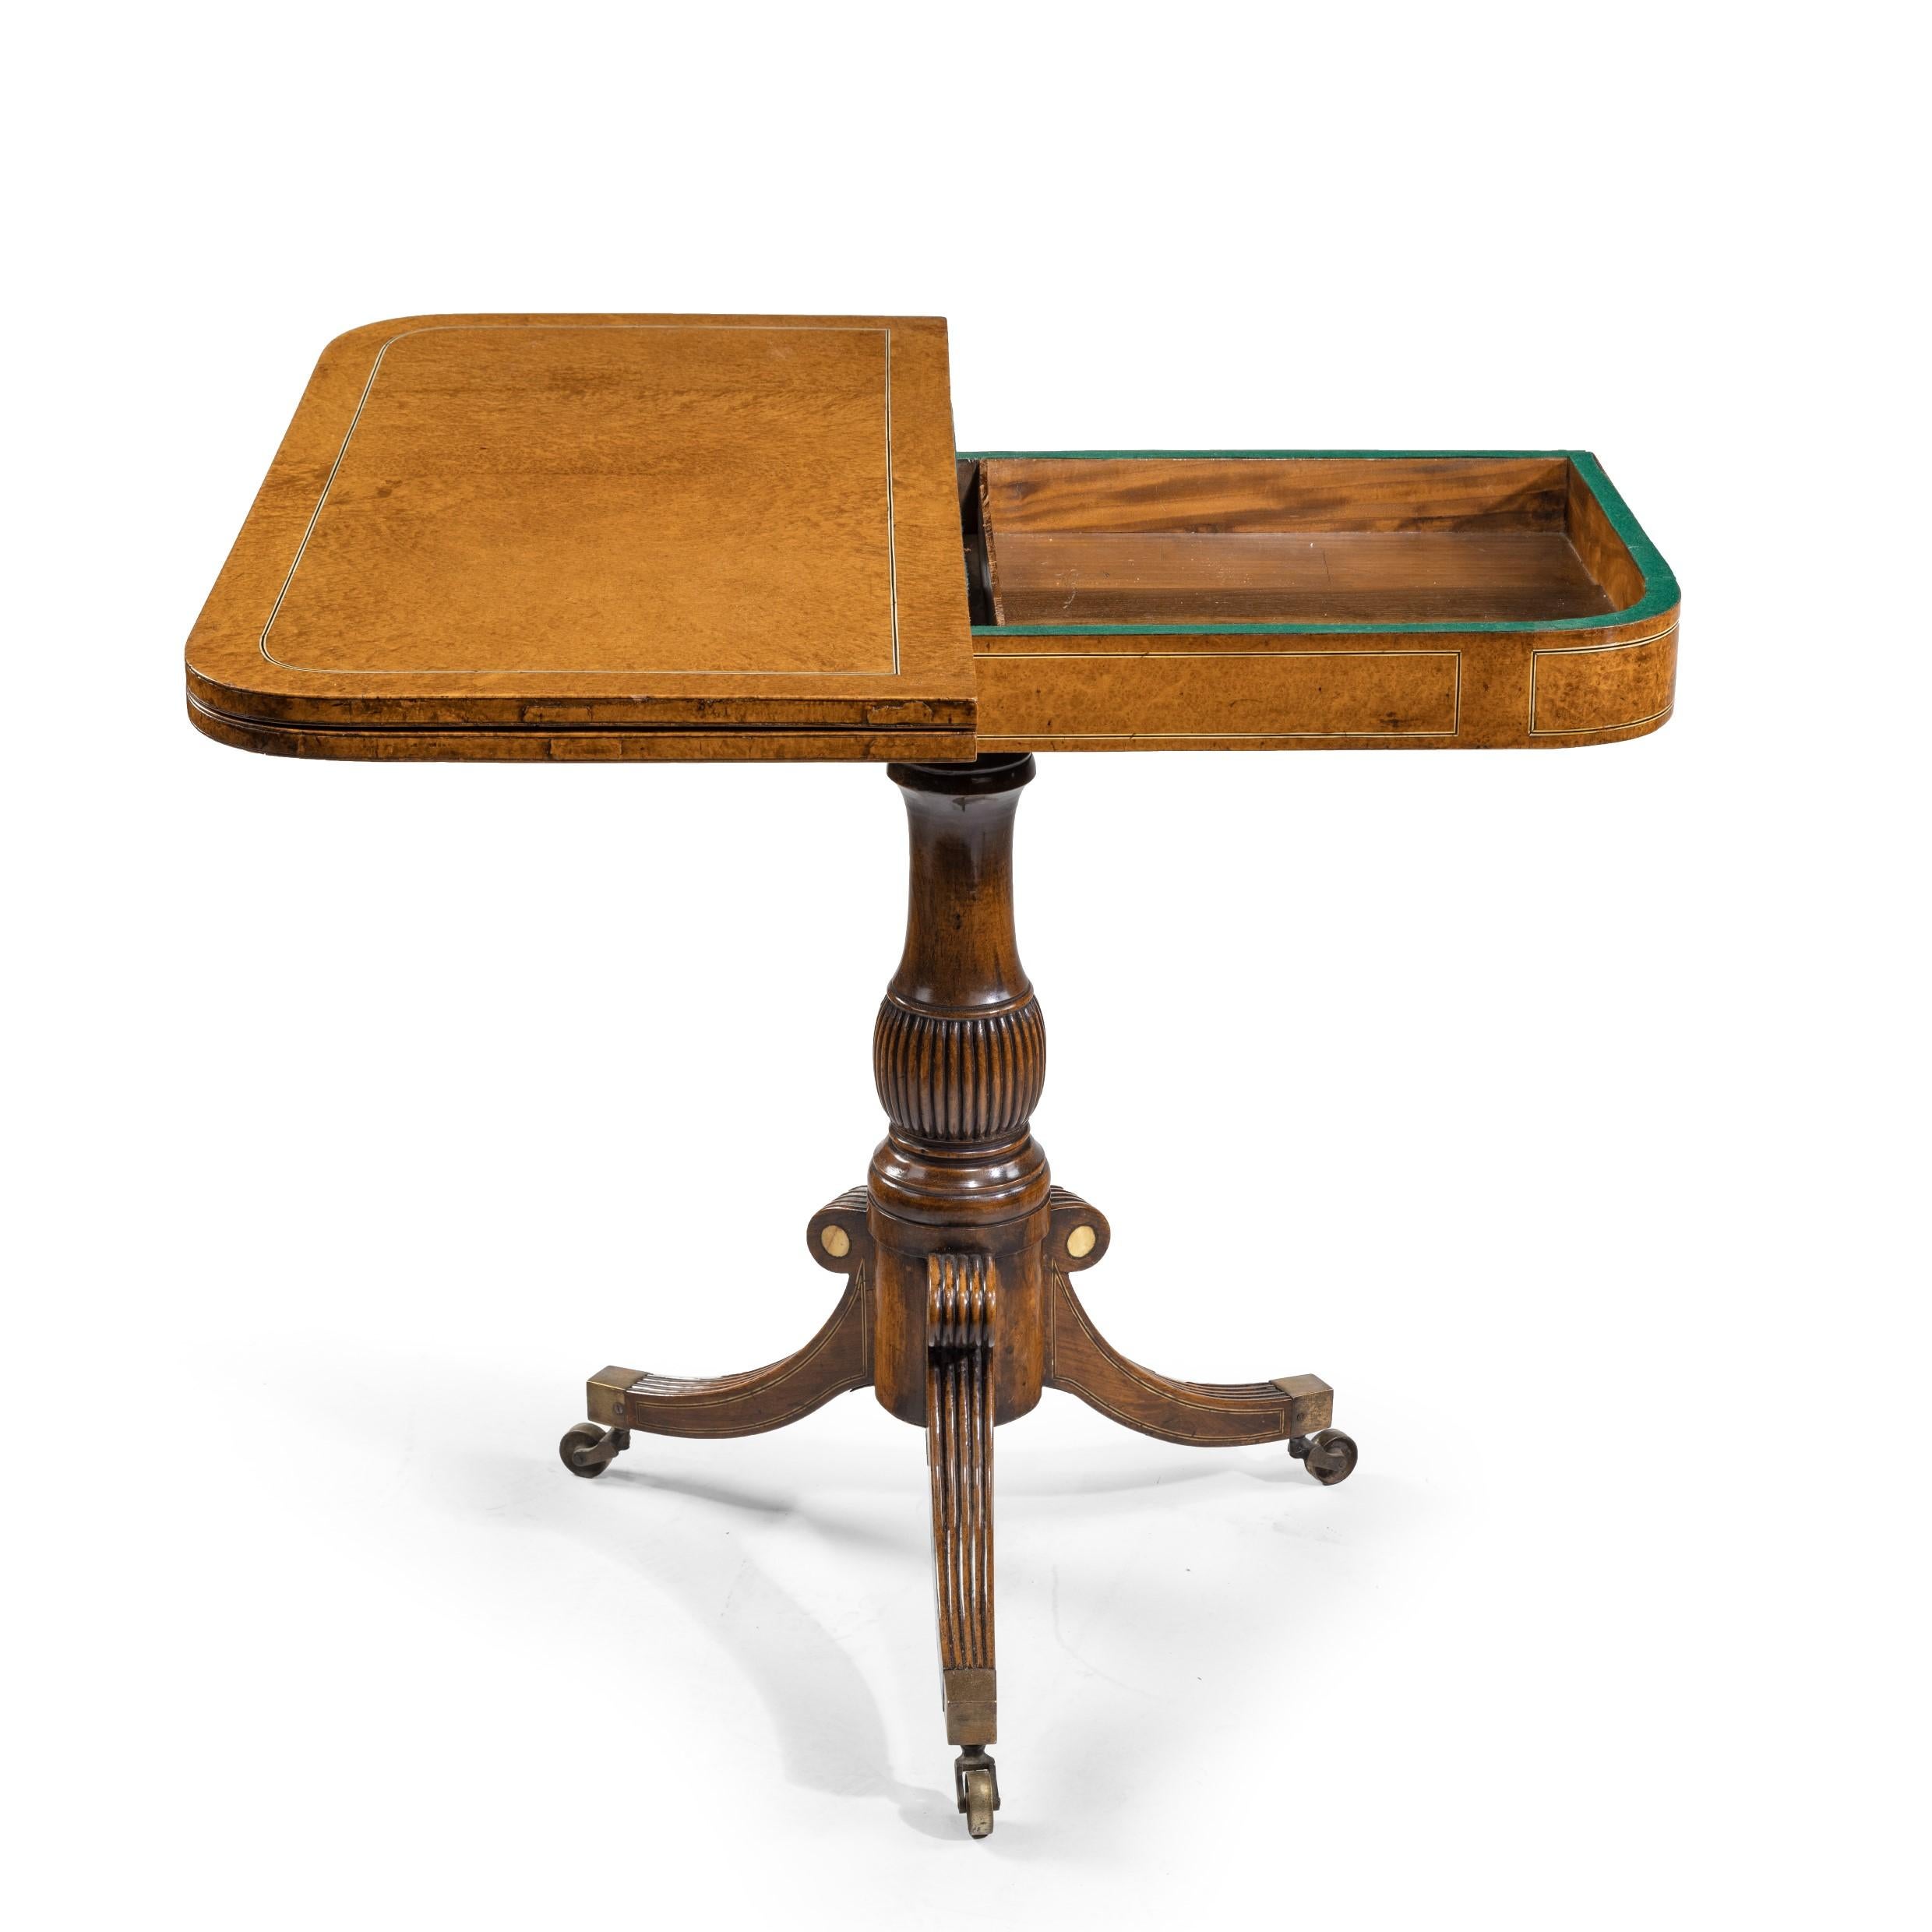 George iv Anglo-Chinese Amboyna Card Table In Good Condition For Sale In Lymington, Hampshire